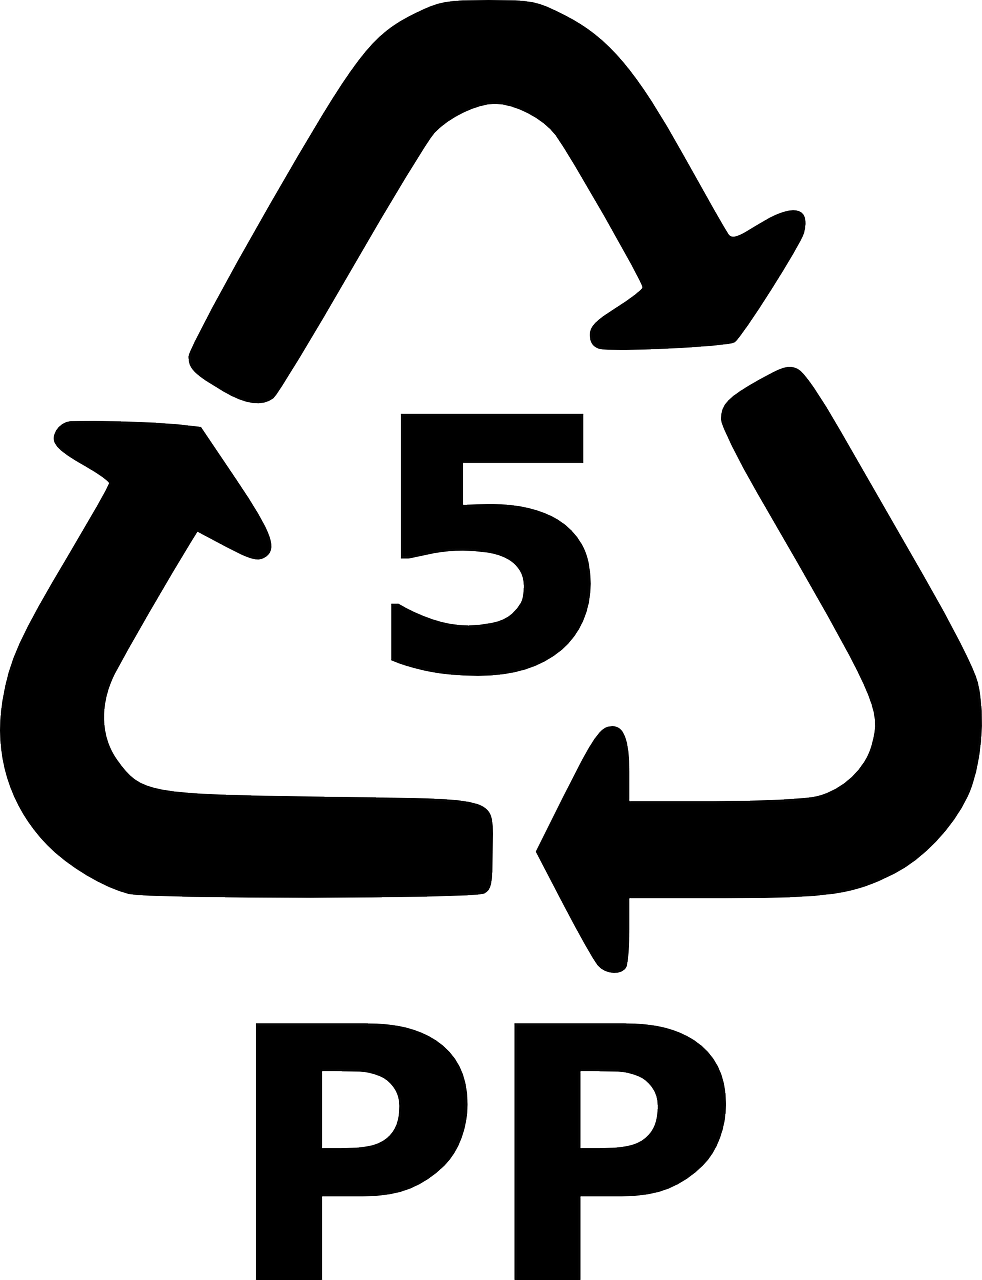 Recycle 5 Pp Recycling Plastic PNG | Picpng